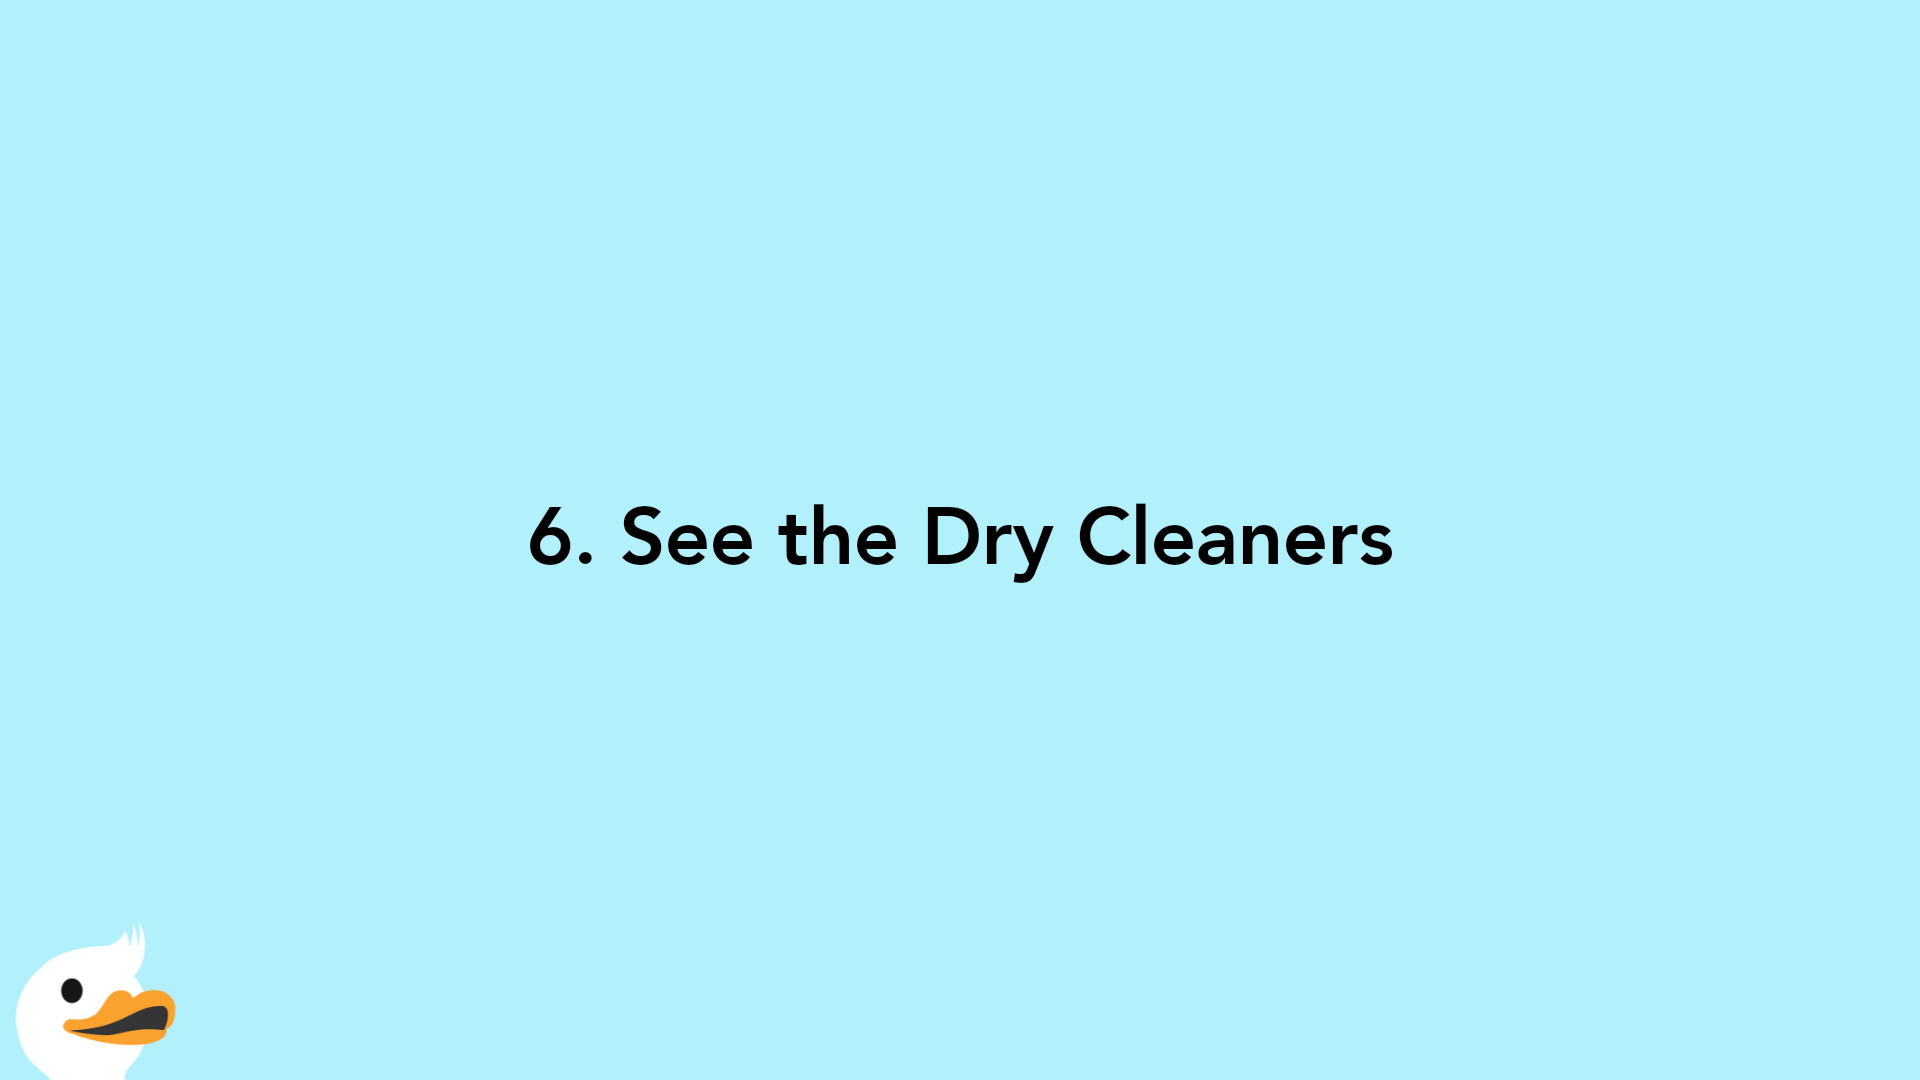 6. See the Dry Cleaners